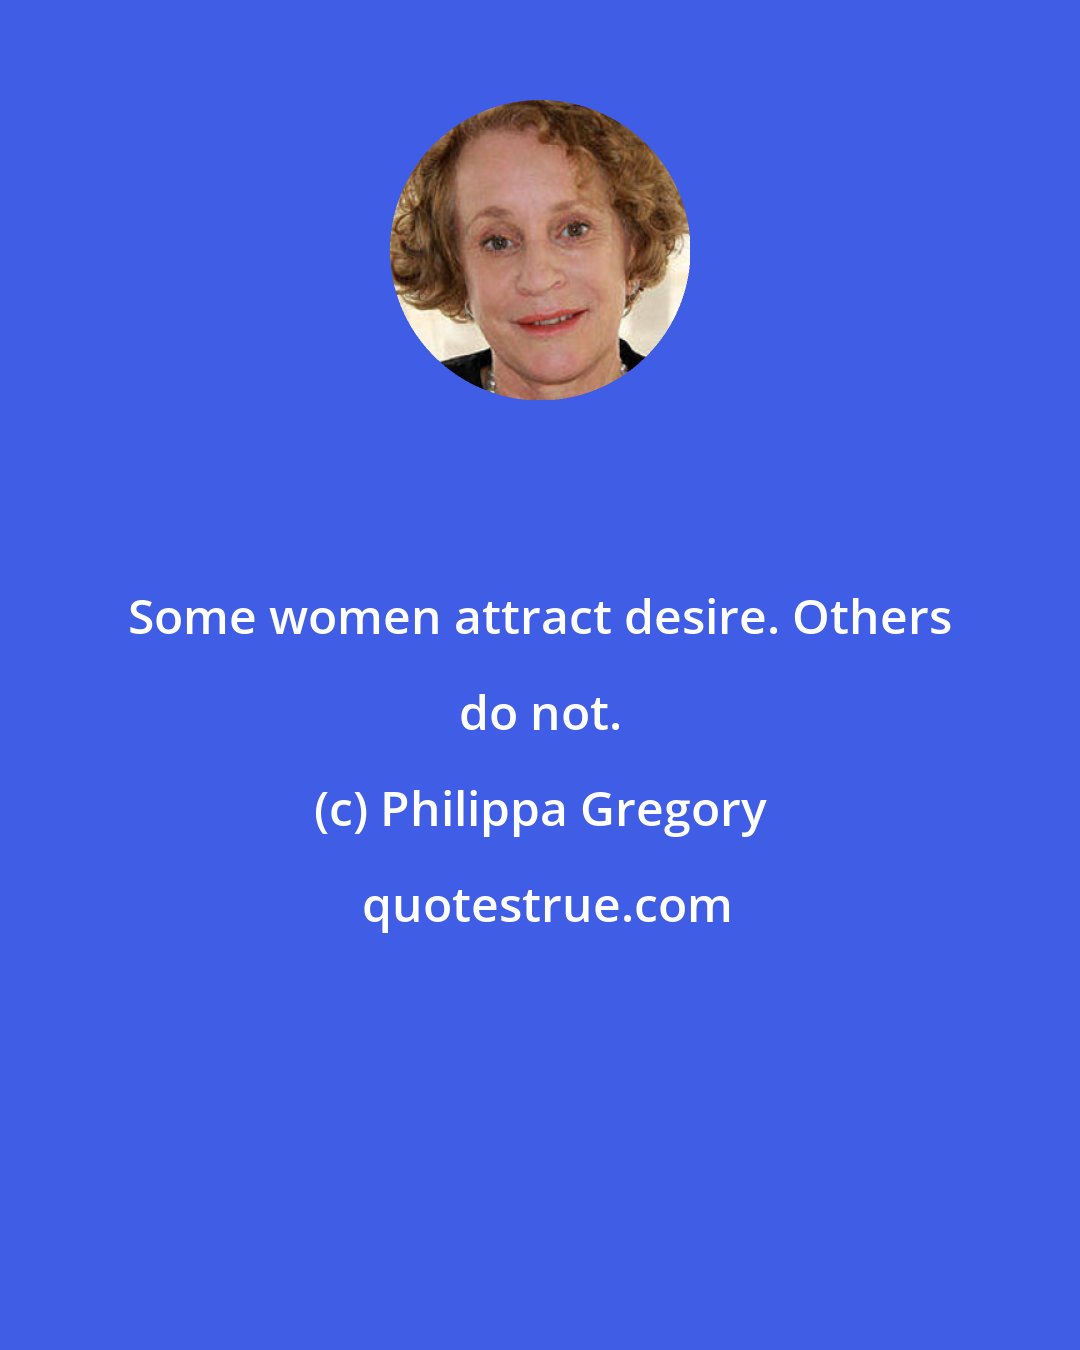 Philippa Gregory: Some women attract desire. Others do not.